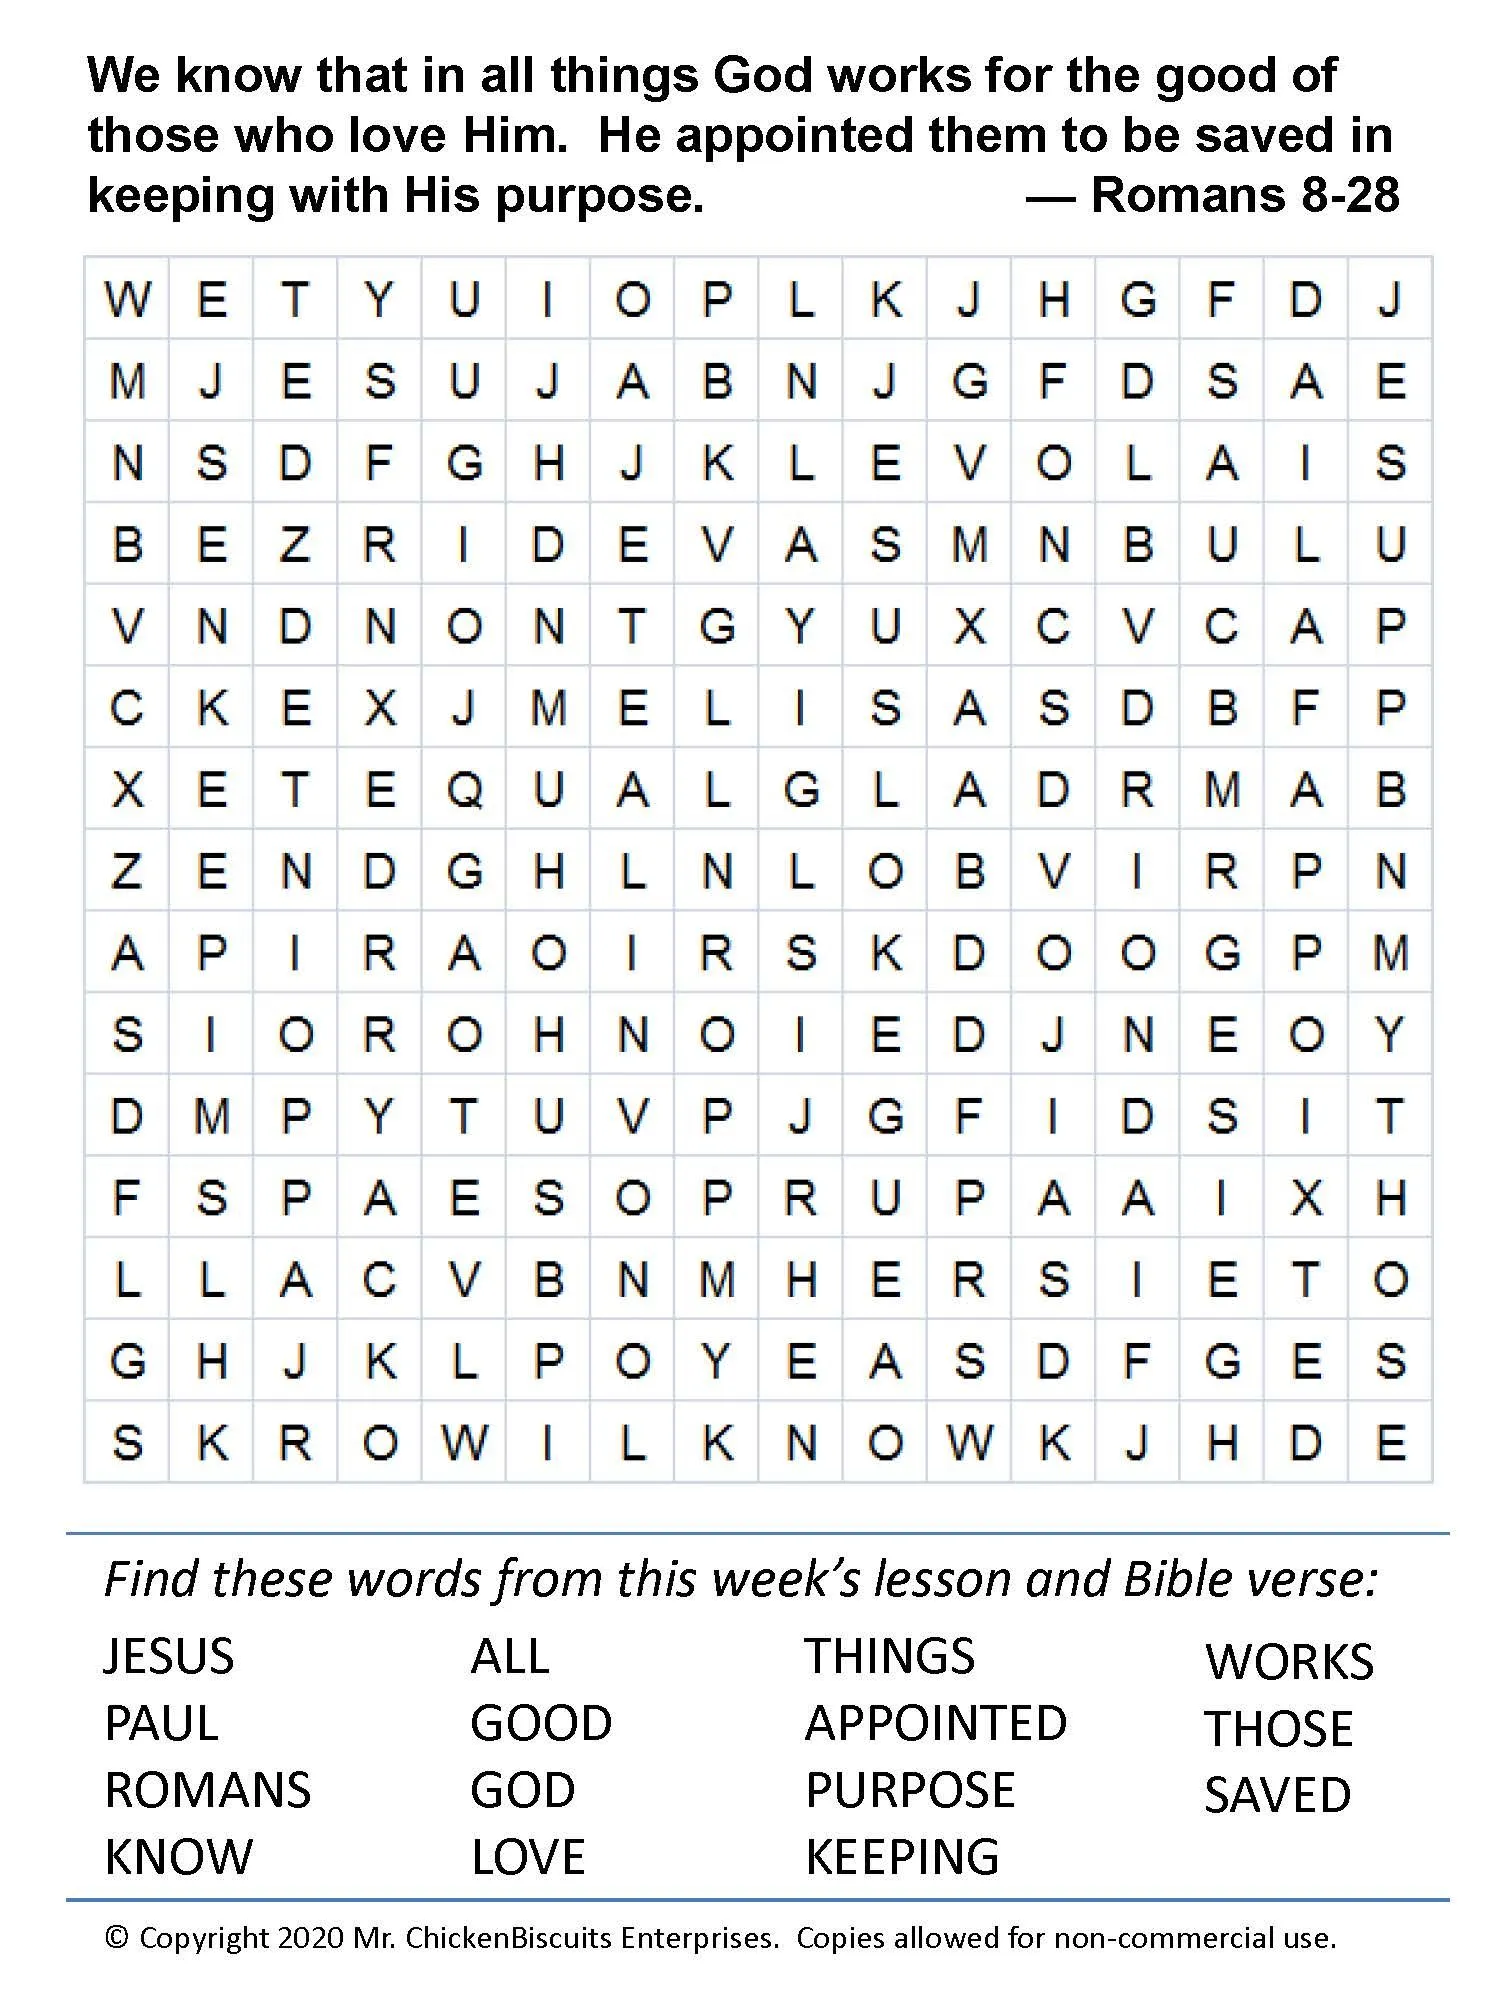 search word bible